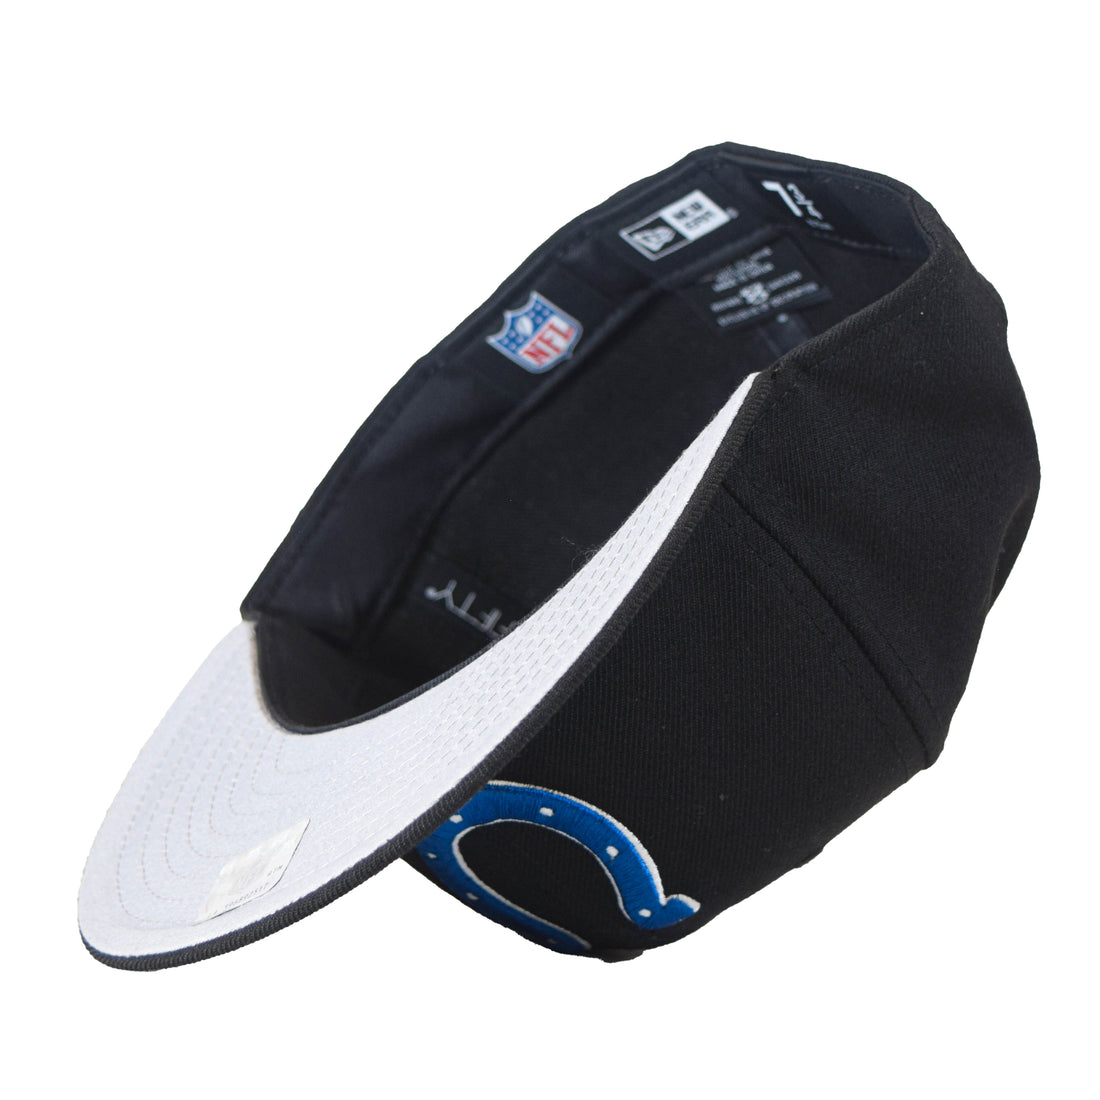 New Era Indianapolis Colts 59Fifty Fitted - Black